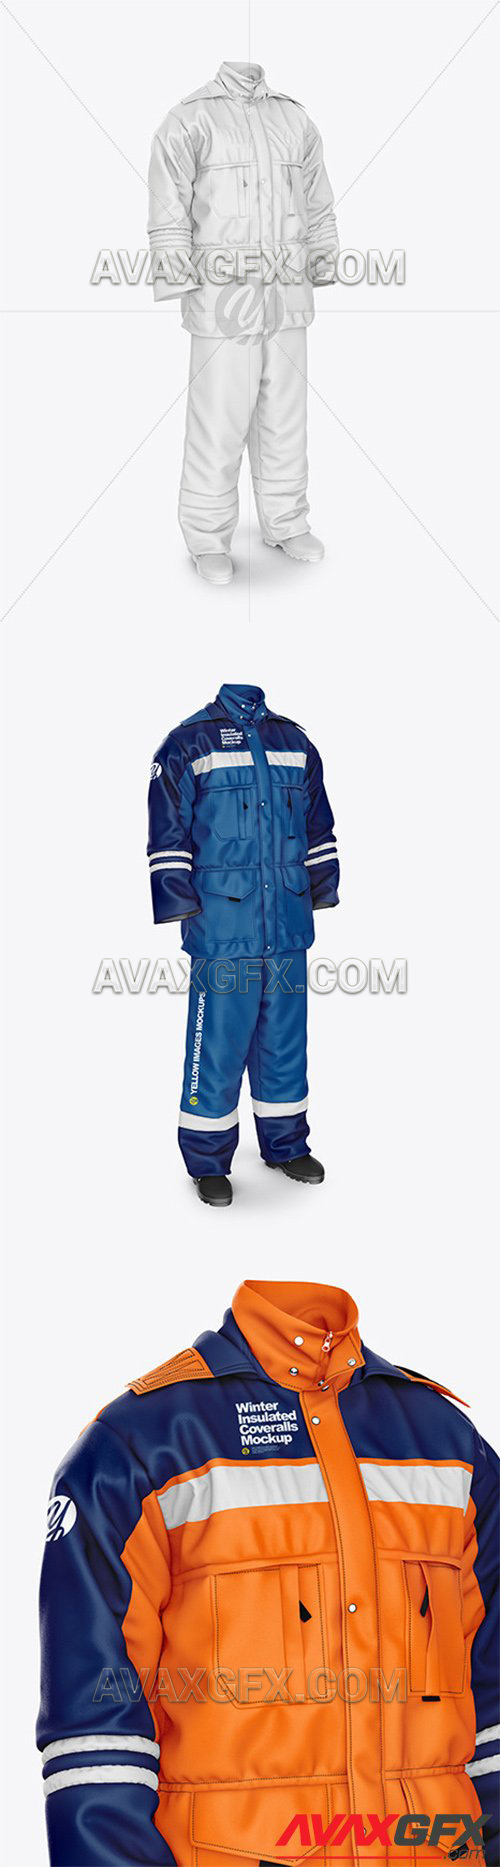 Winter Insulated Coveralls Mockup – Front Half Side View 57529